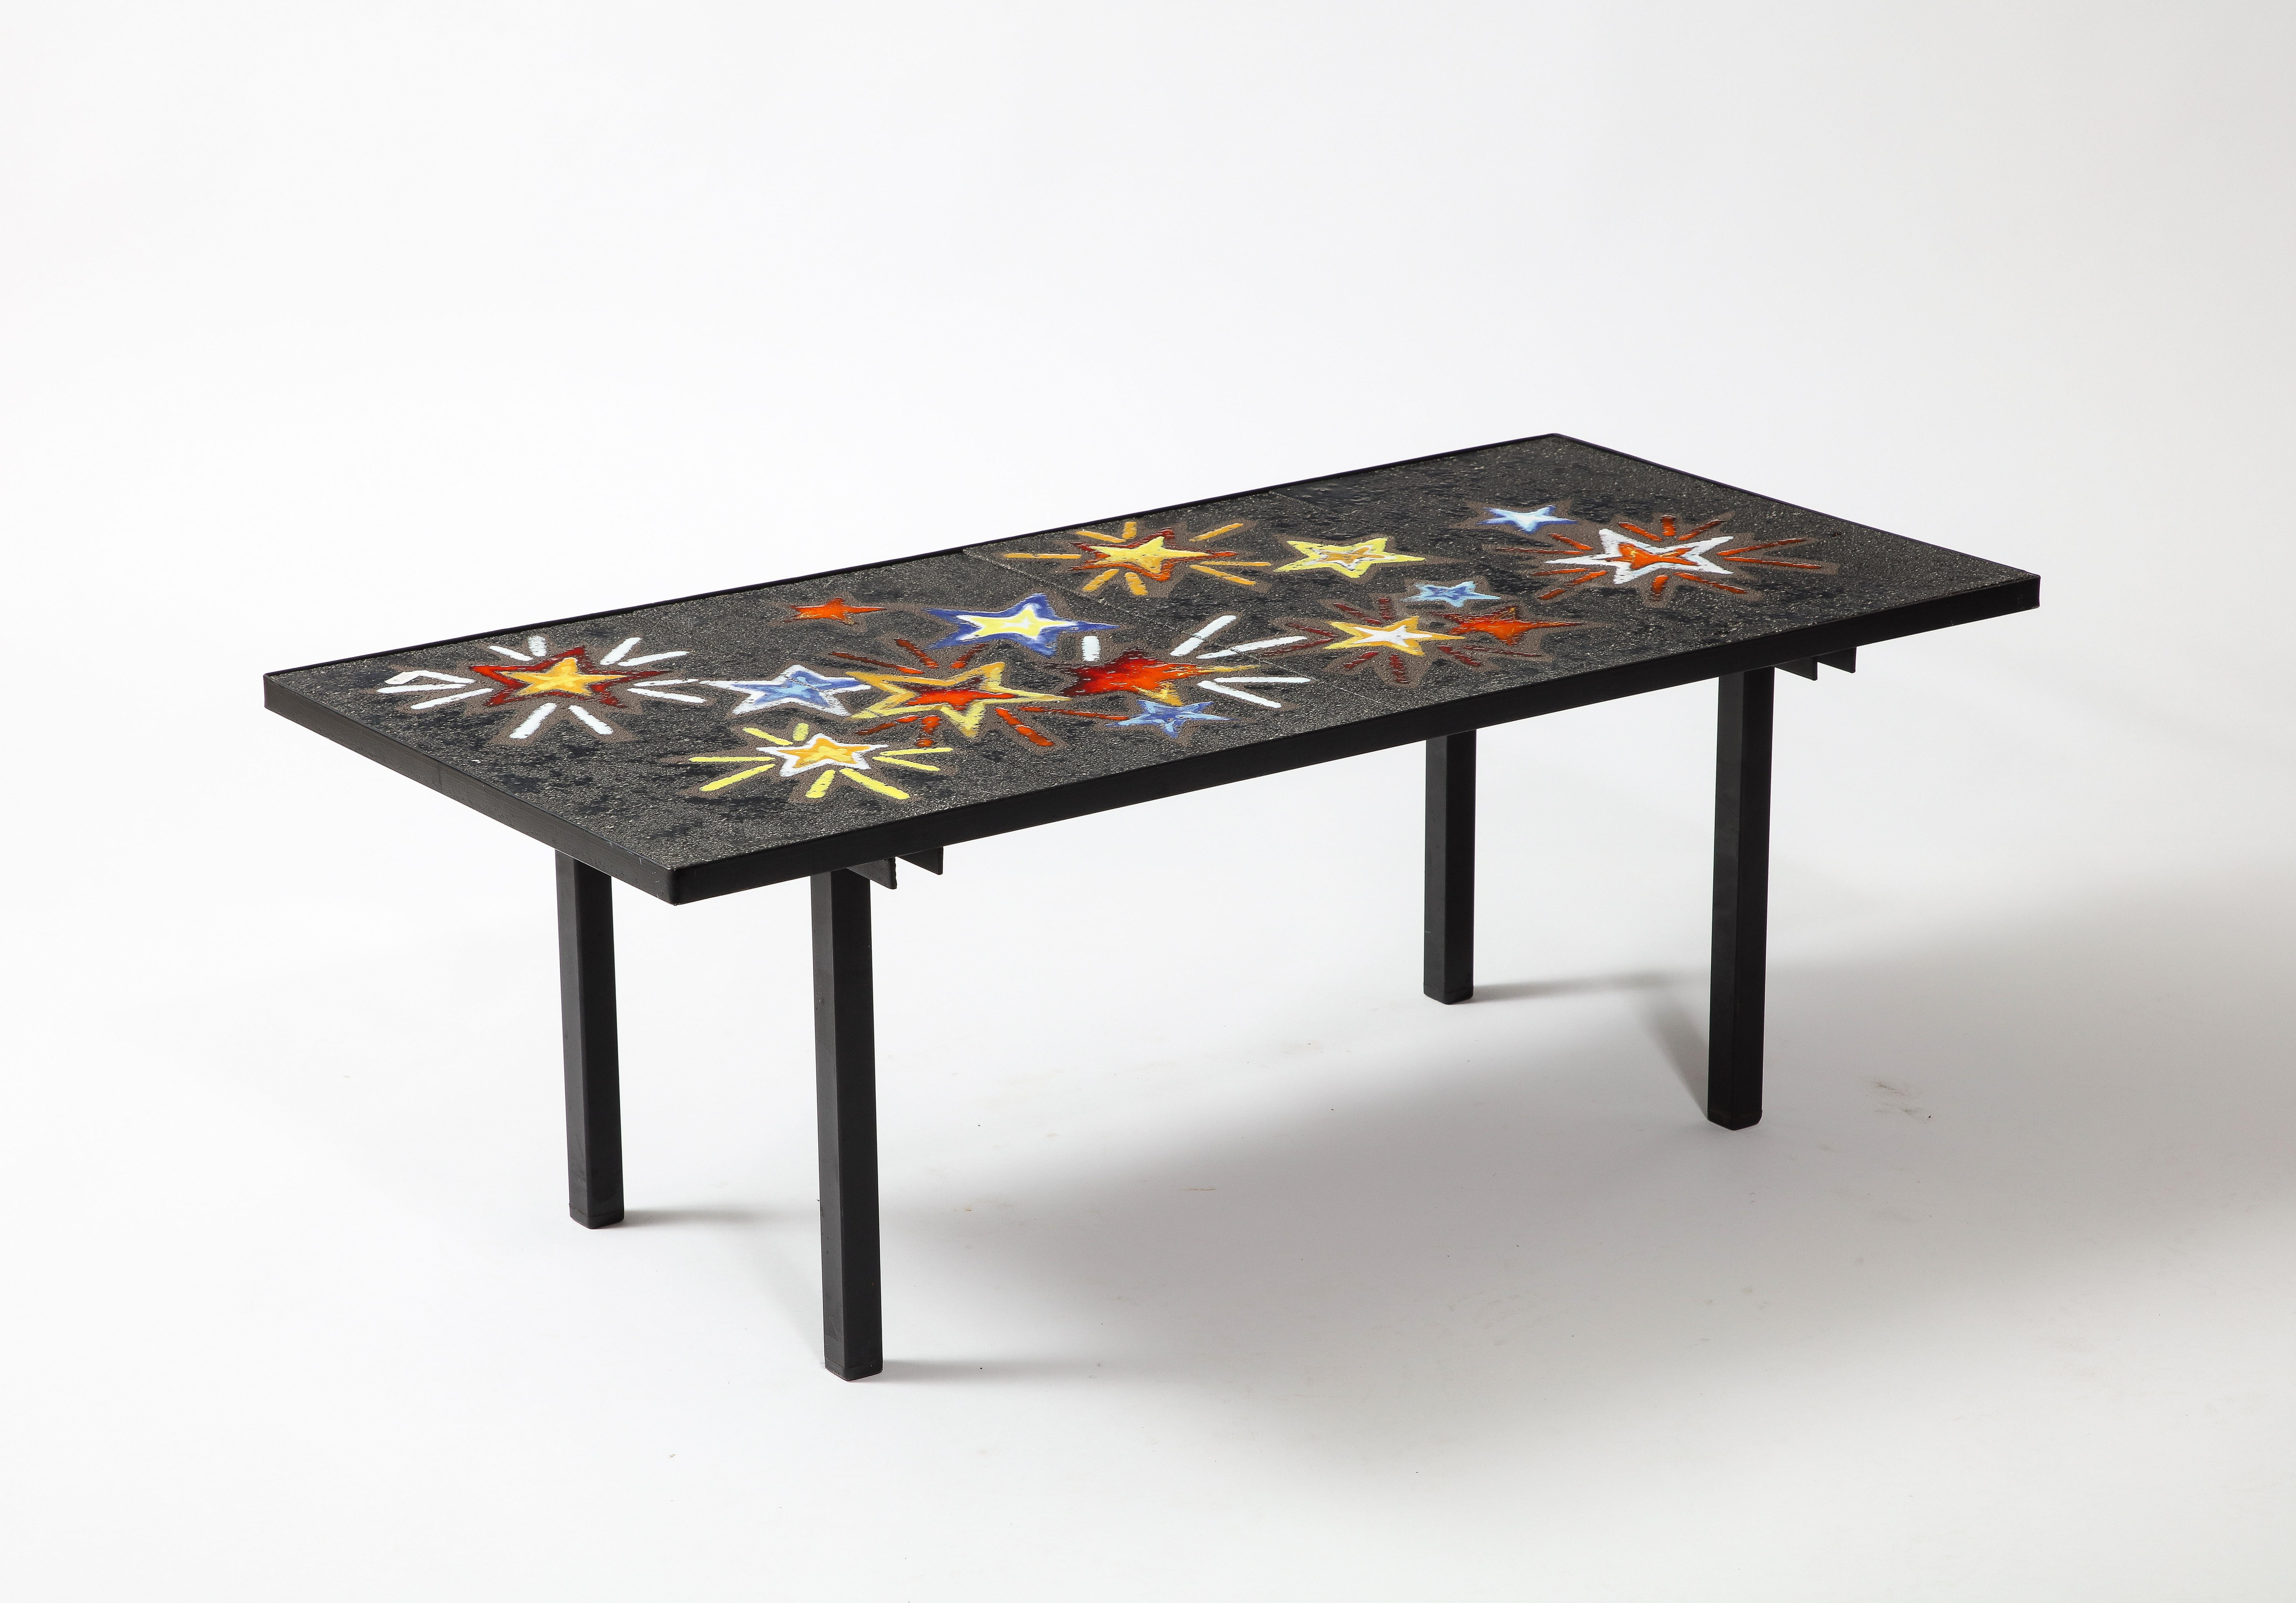 70s tiled coffee table